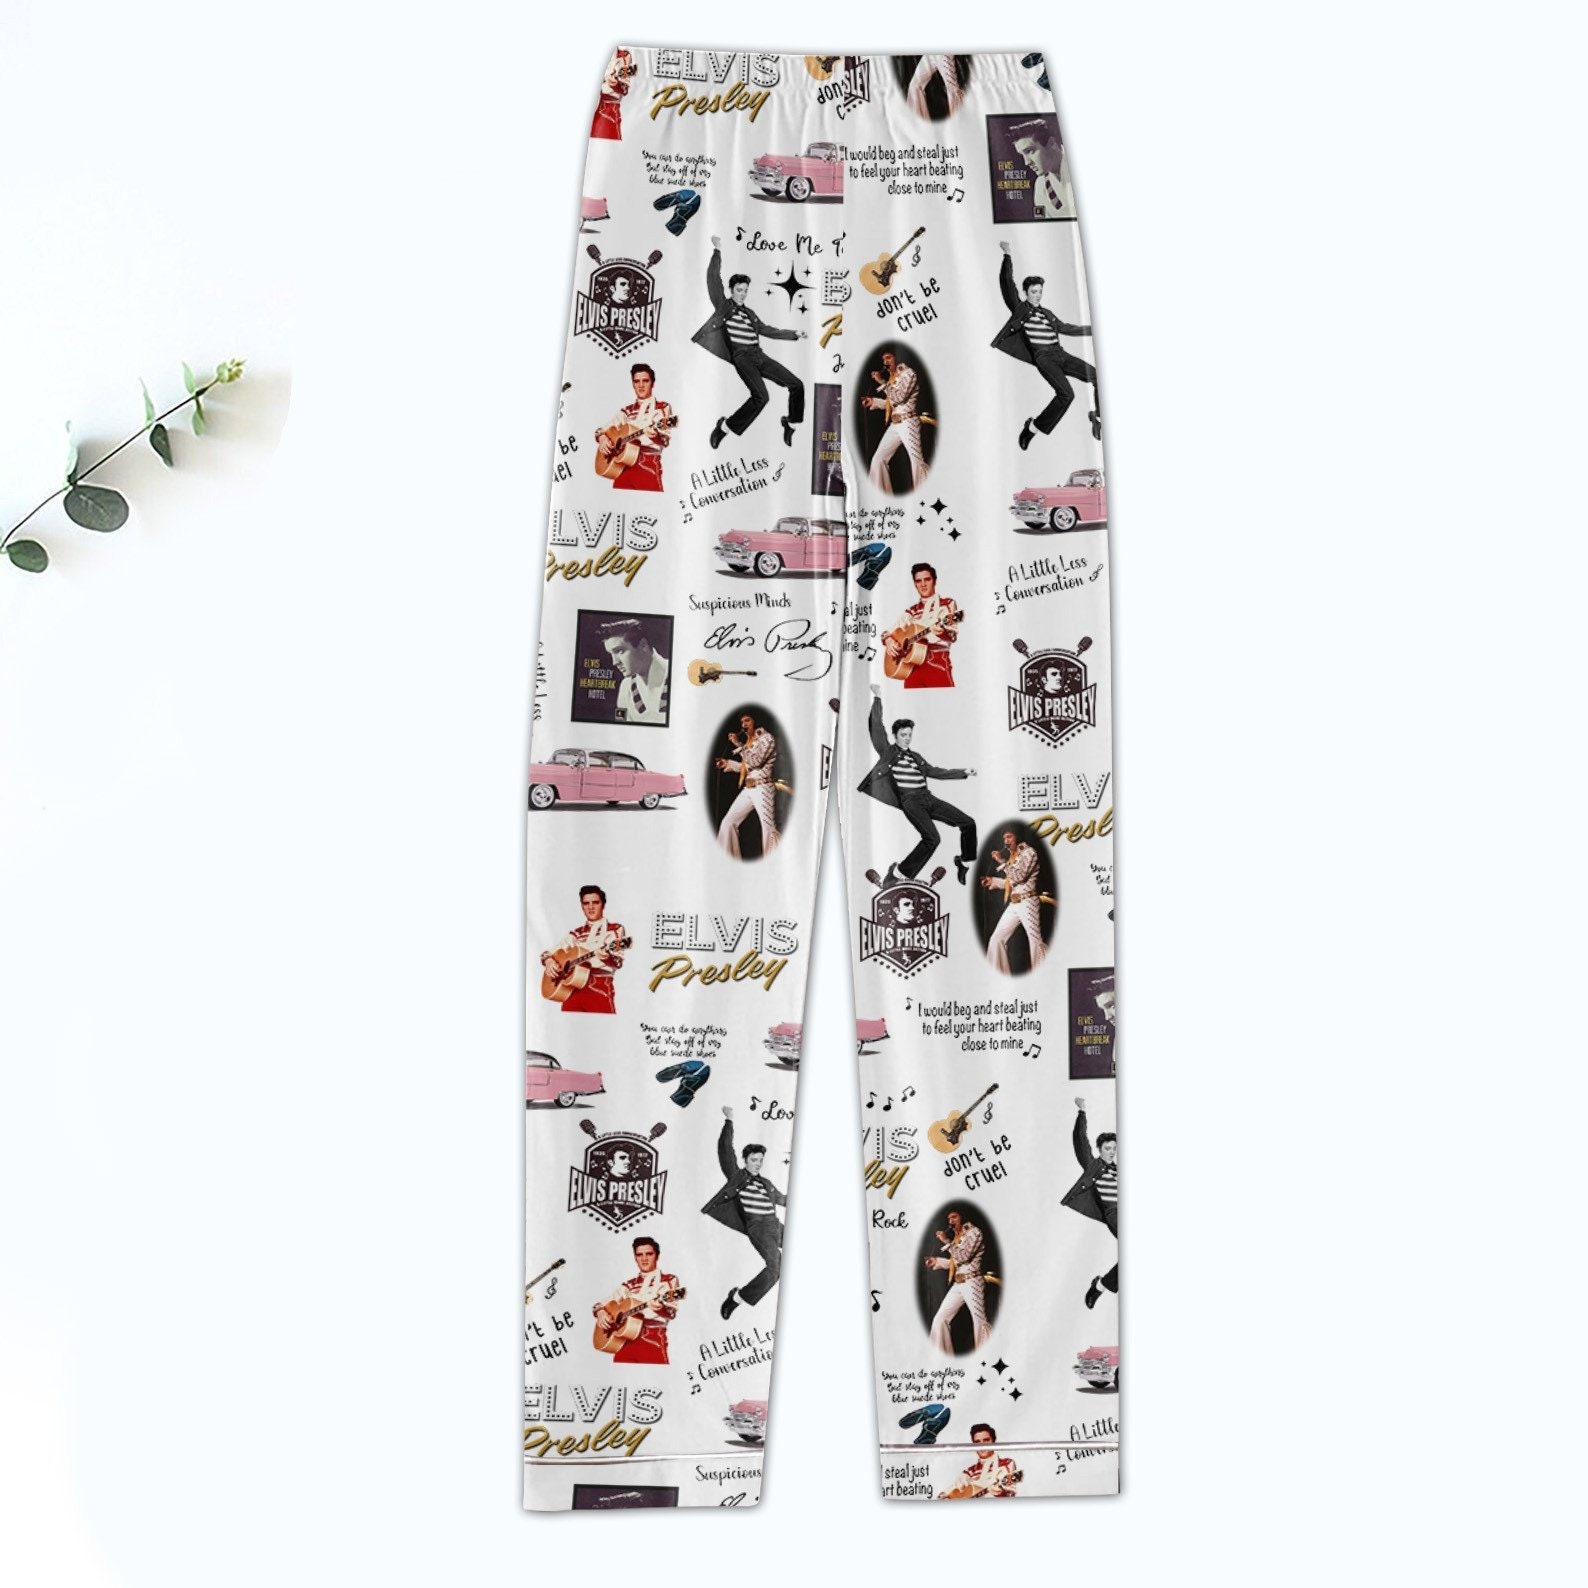 Elvis Presley Pajamas Set, Rock And Roll Pajamas, Falling In Love With You